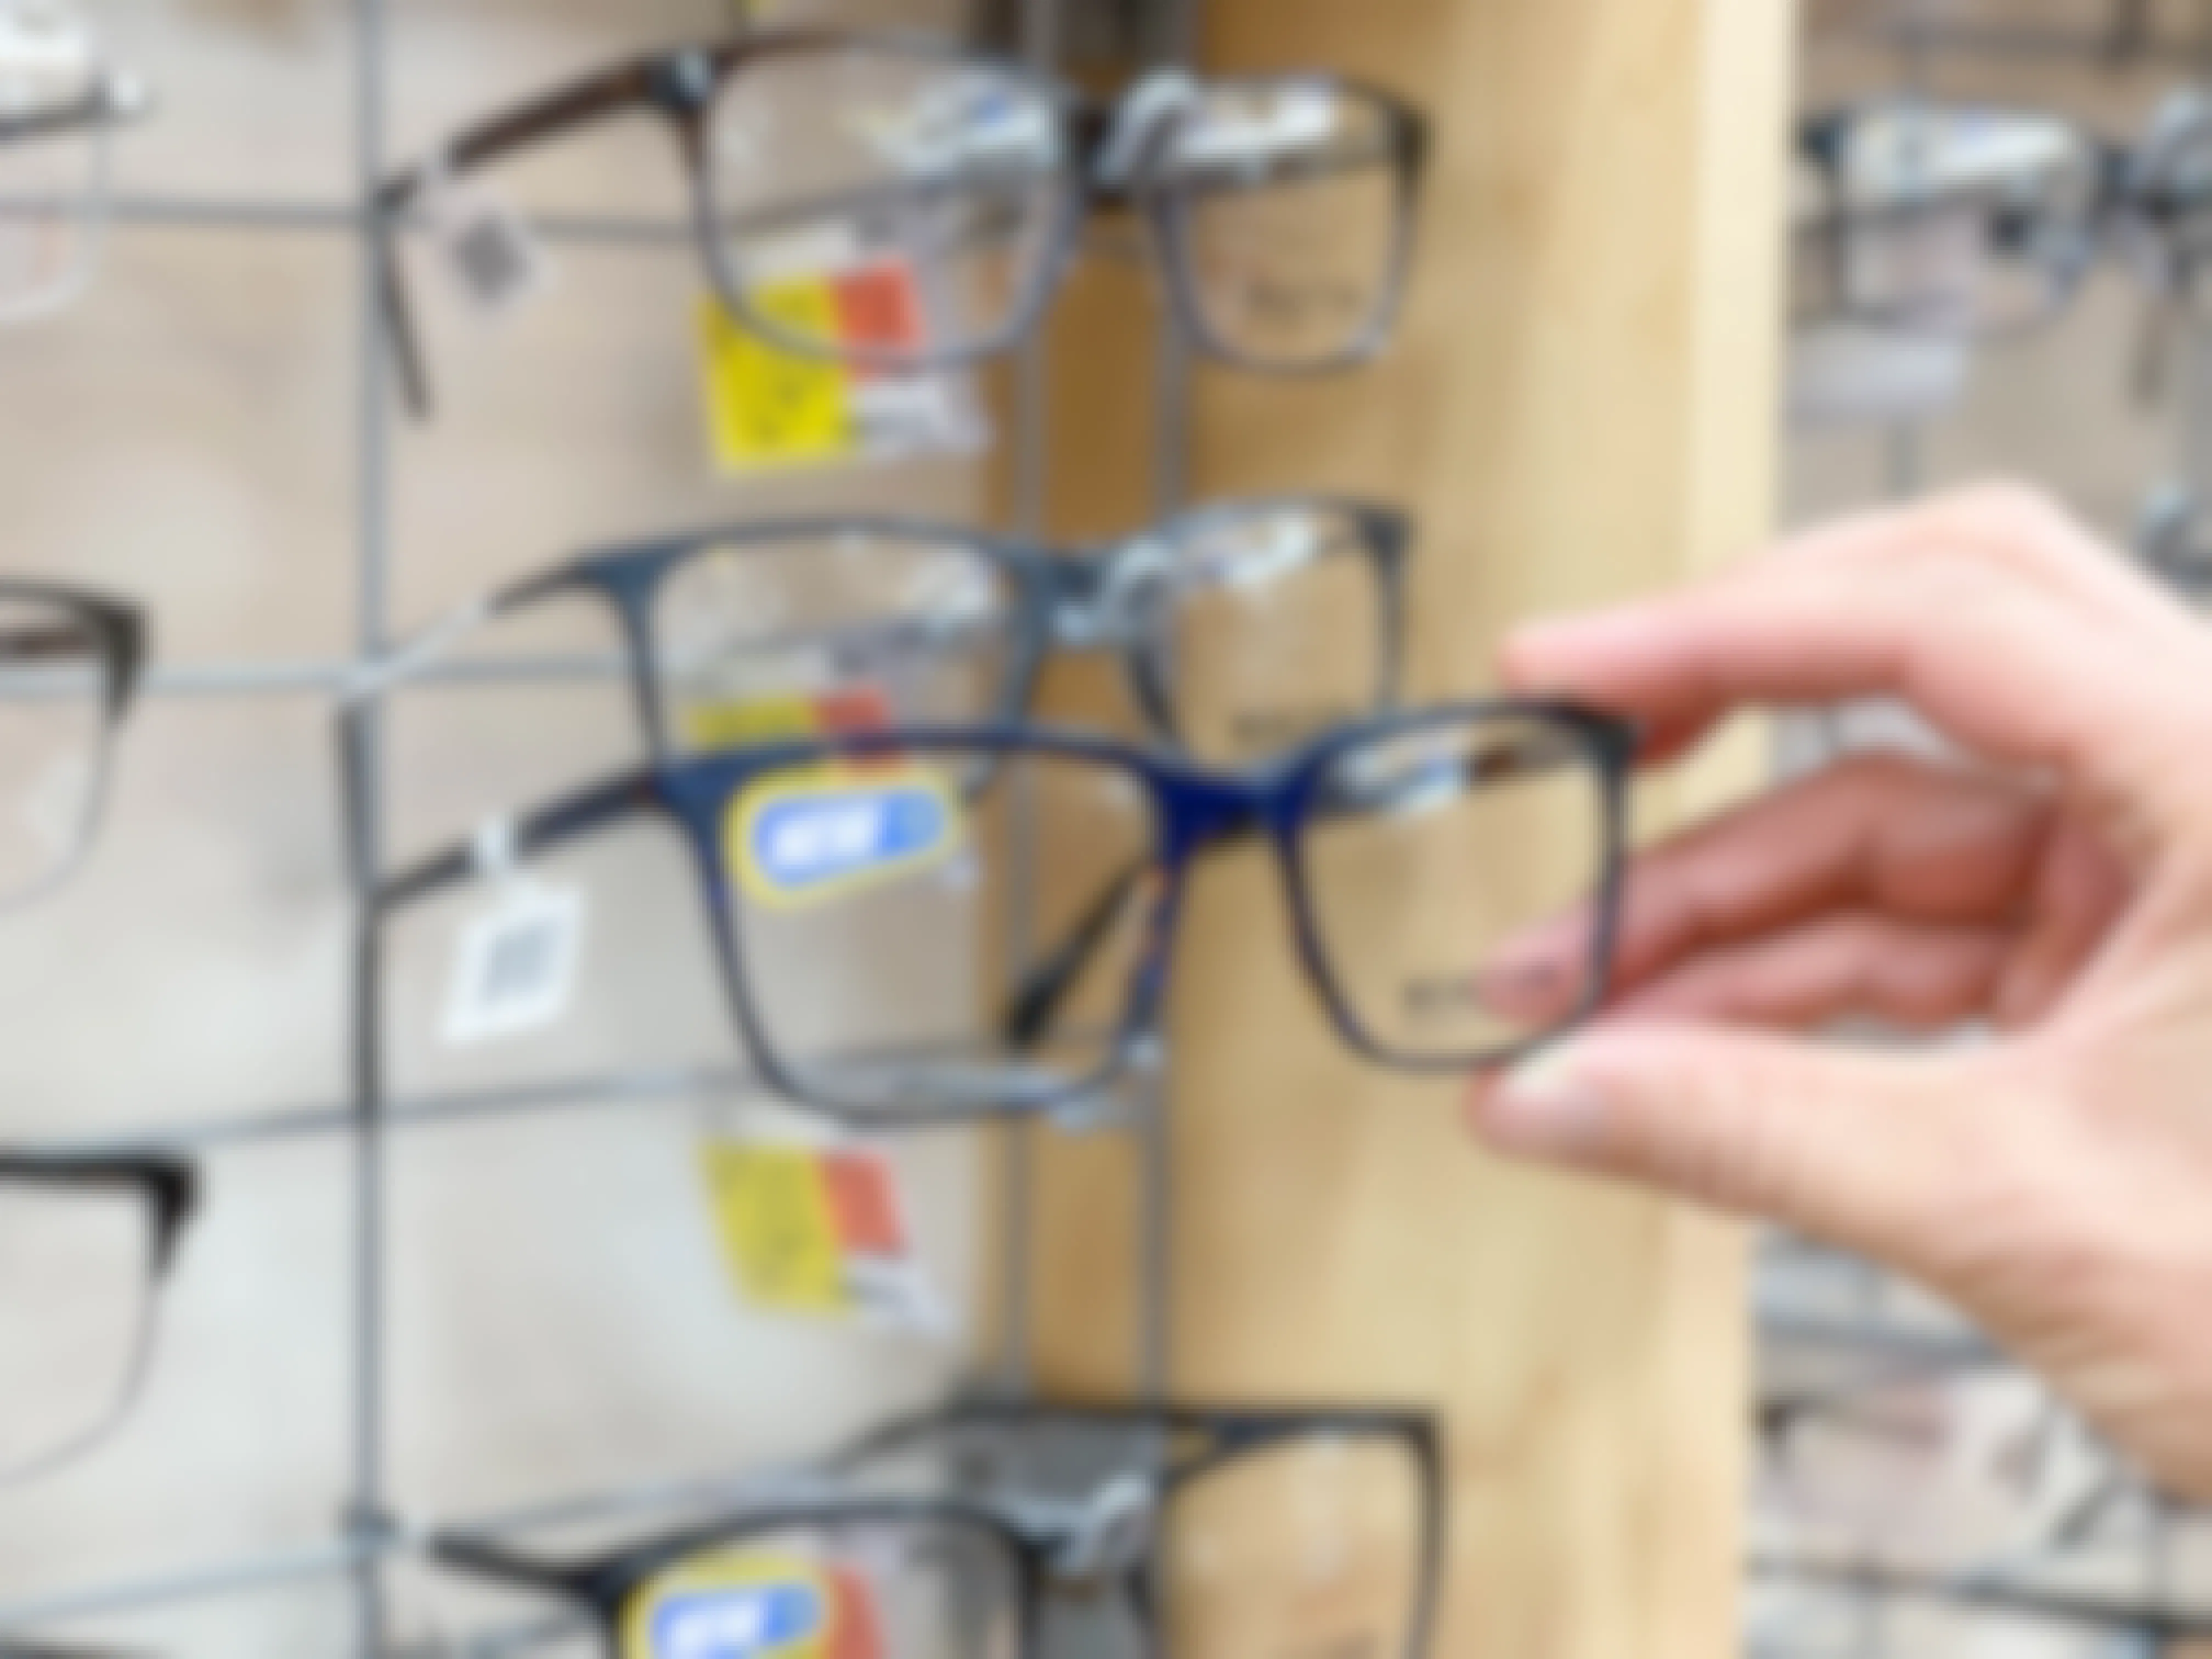 Walmart Eye Care: This Is Where You Need to Buy Your Contacts